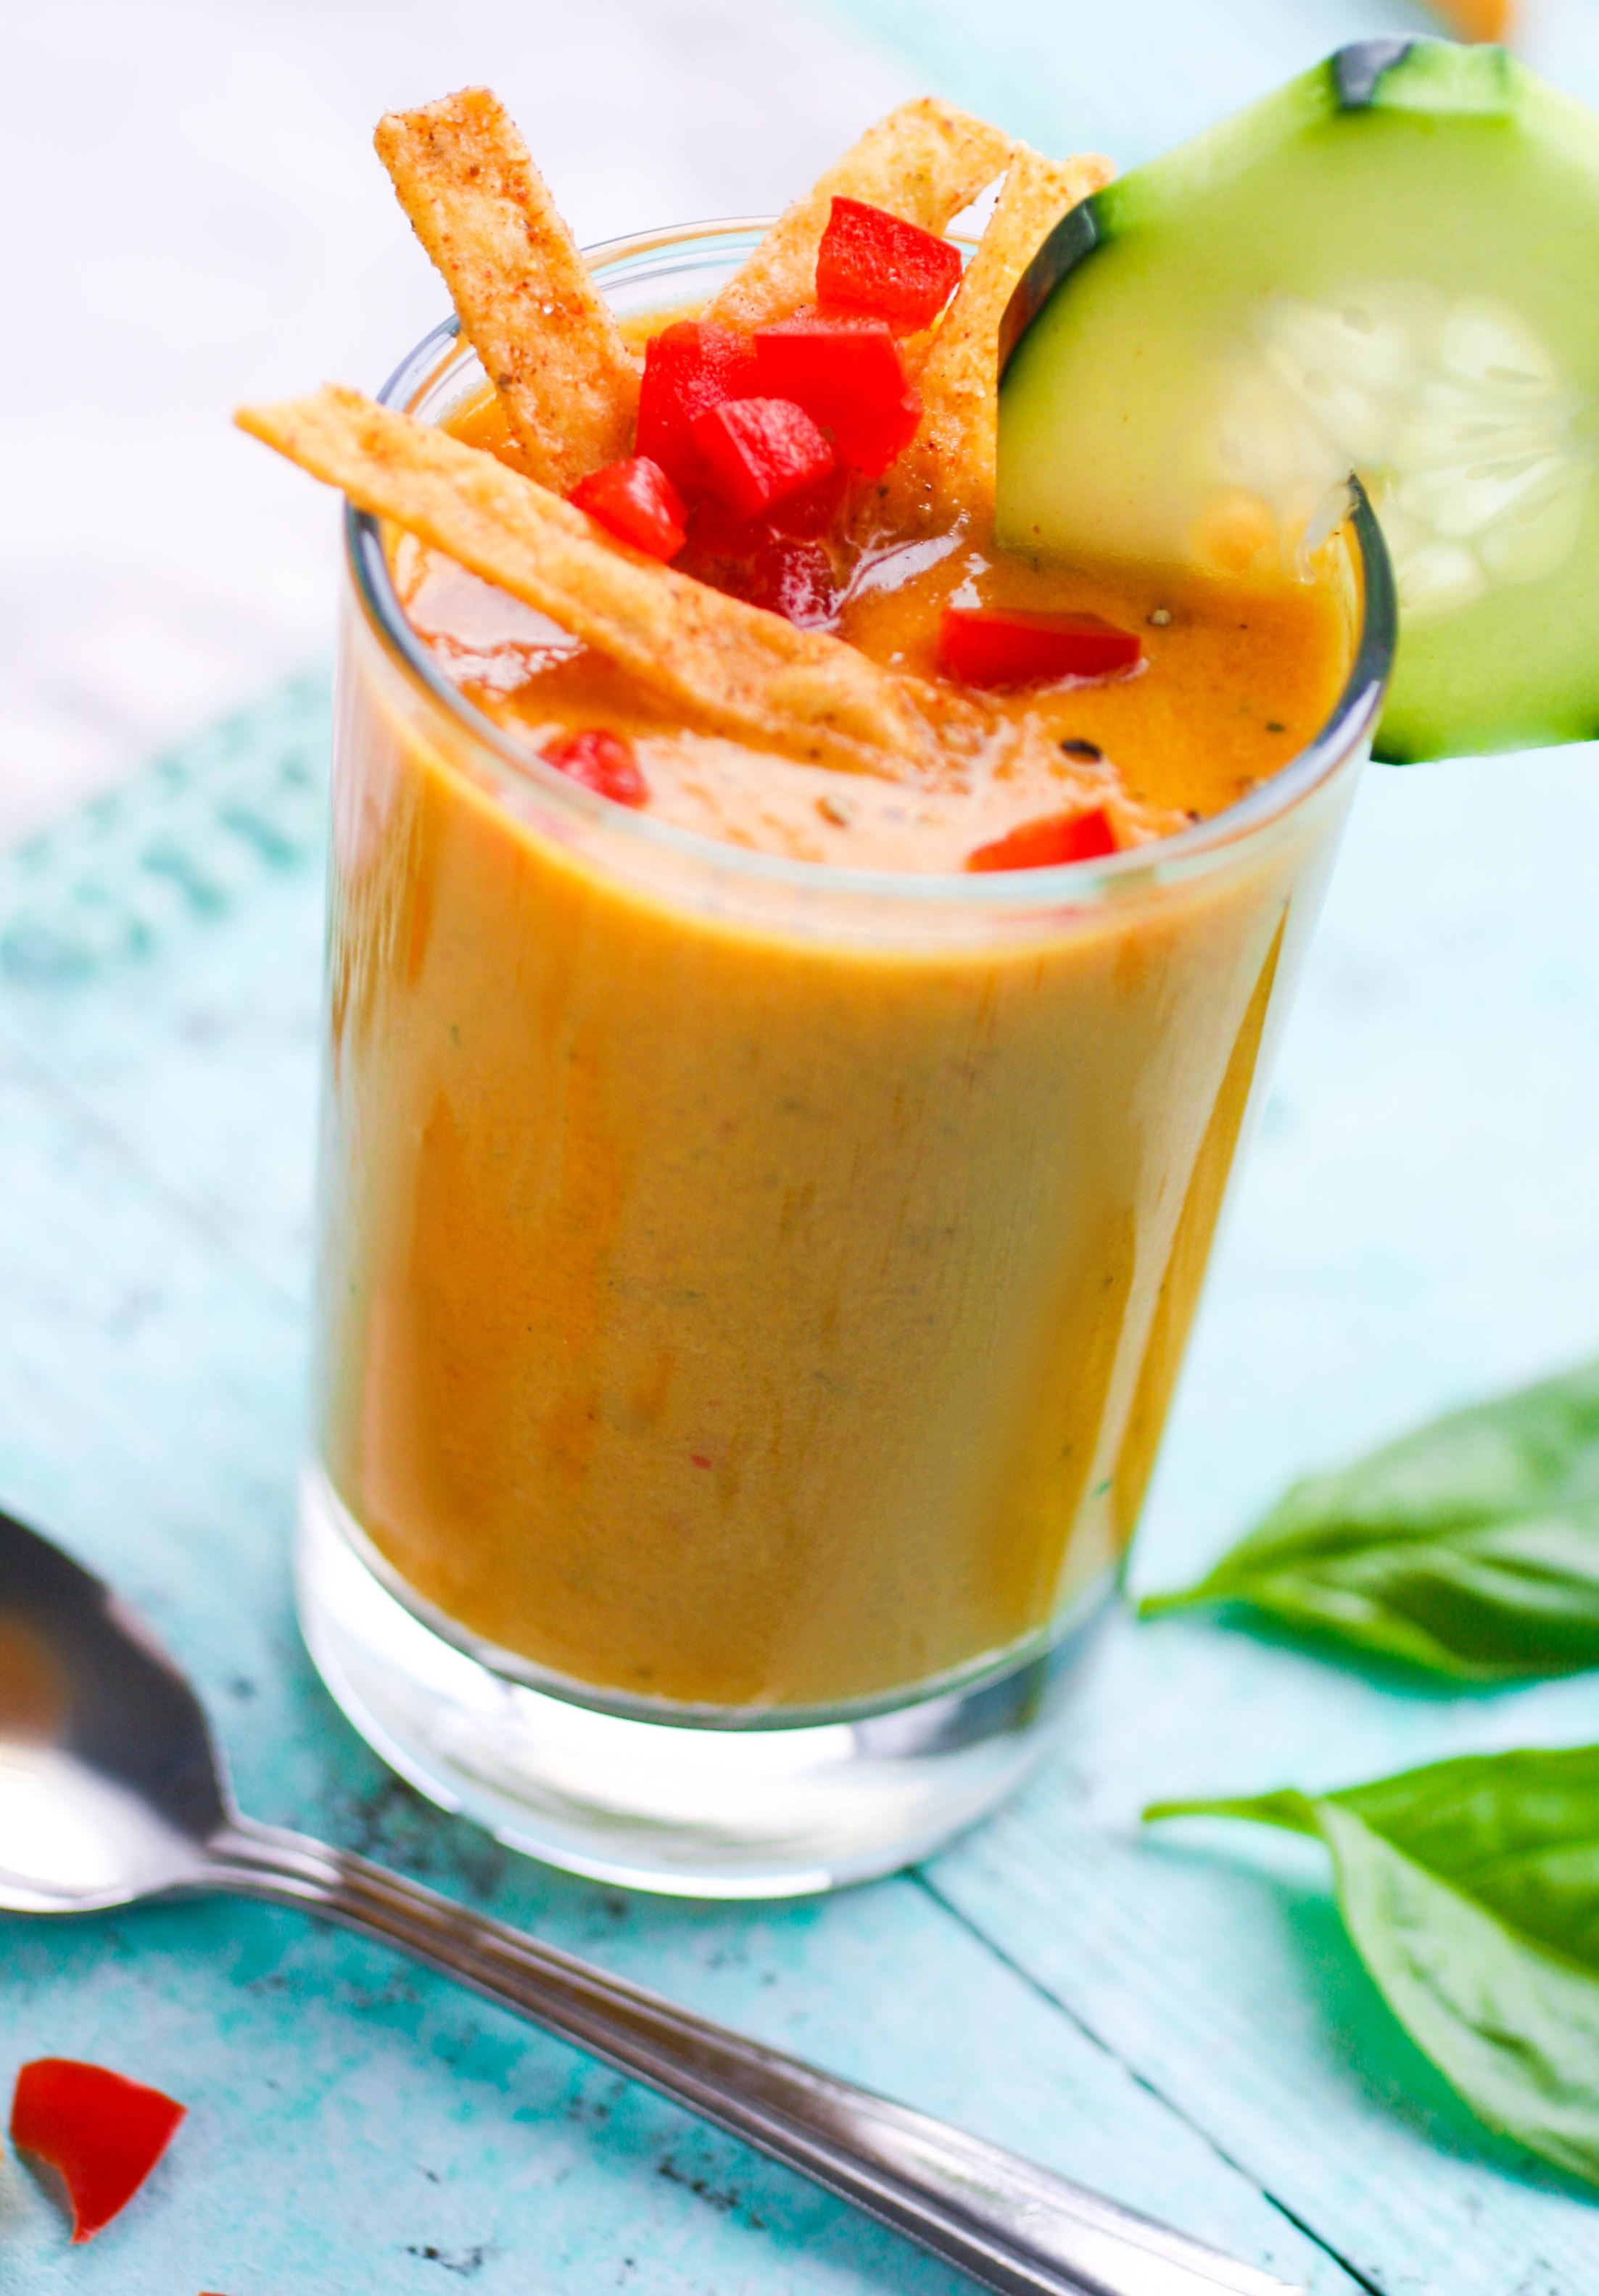 Yellow Heirloom Tomato Gazpacho is a fabulous appetizer for the season. Yellow Heirloom Tomato Gazpacho is perfect to serve as an appetizer during the warm weather! Yellow Heirloom Tomato Gazpacho is easy to make, and so refreshing!